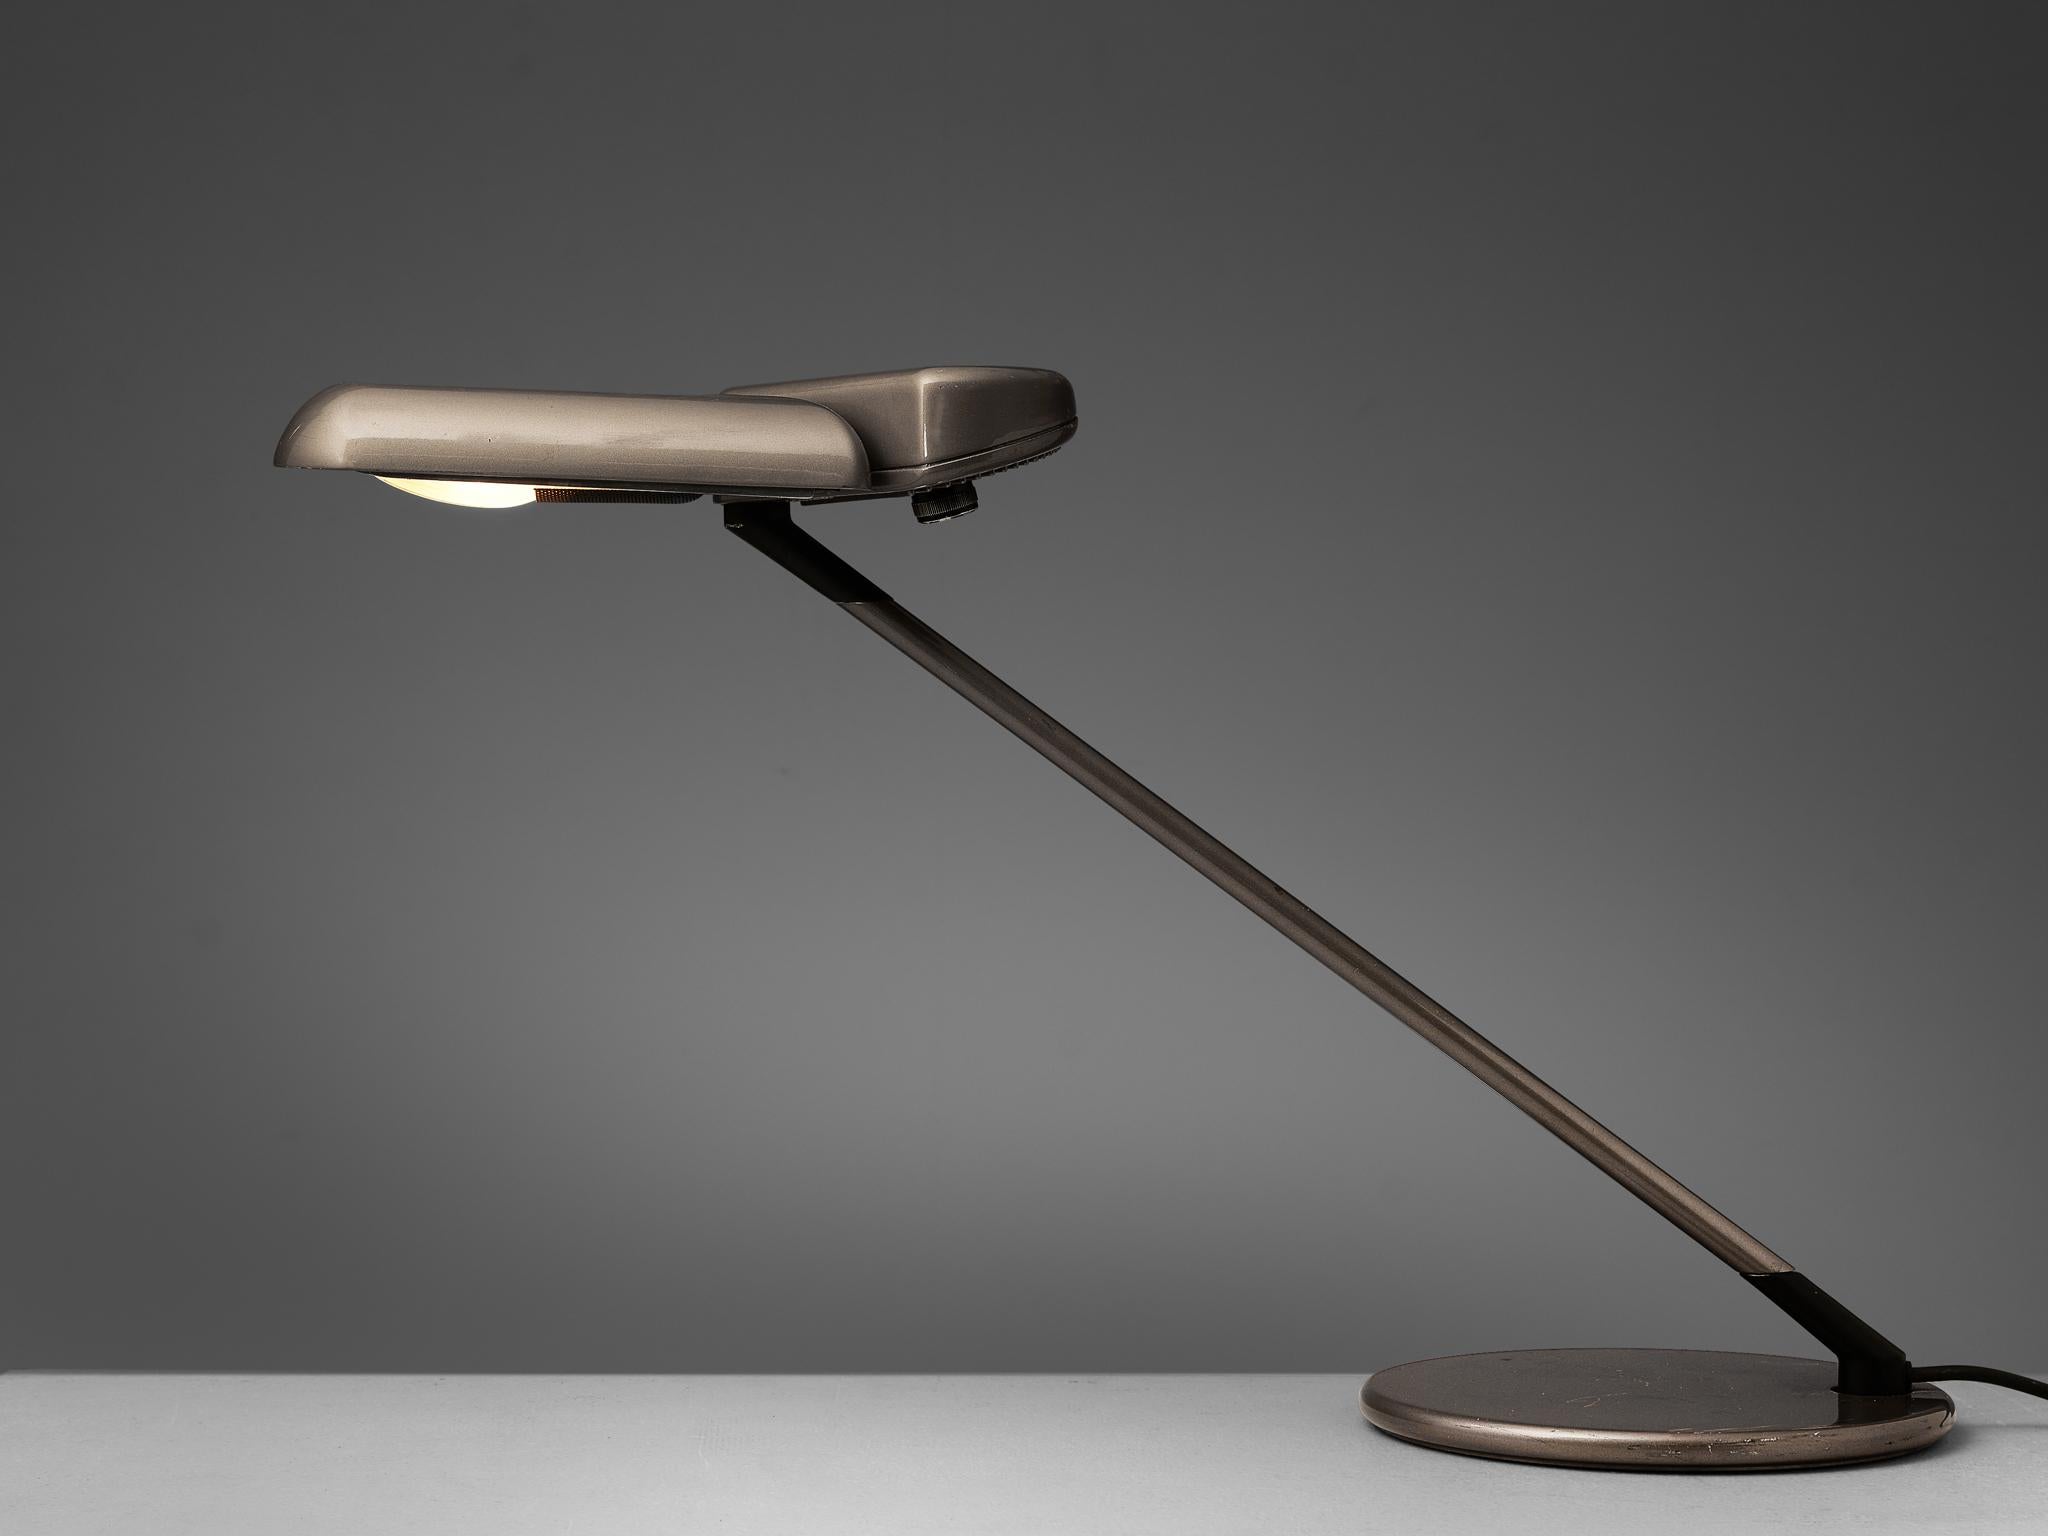 Bruno Gecchelin for Arteluce, desk lamp ‘Ring’ A400, metal, Italy, 1979

This ‘Ring’ desk lamp by Bruno Gecchelin for Arteluce was designed in 1979. It features an adjustable shade that can be turned in any direction that you prefer. The switch is